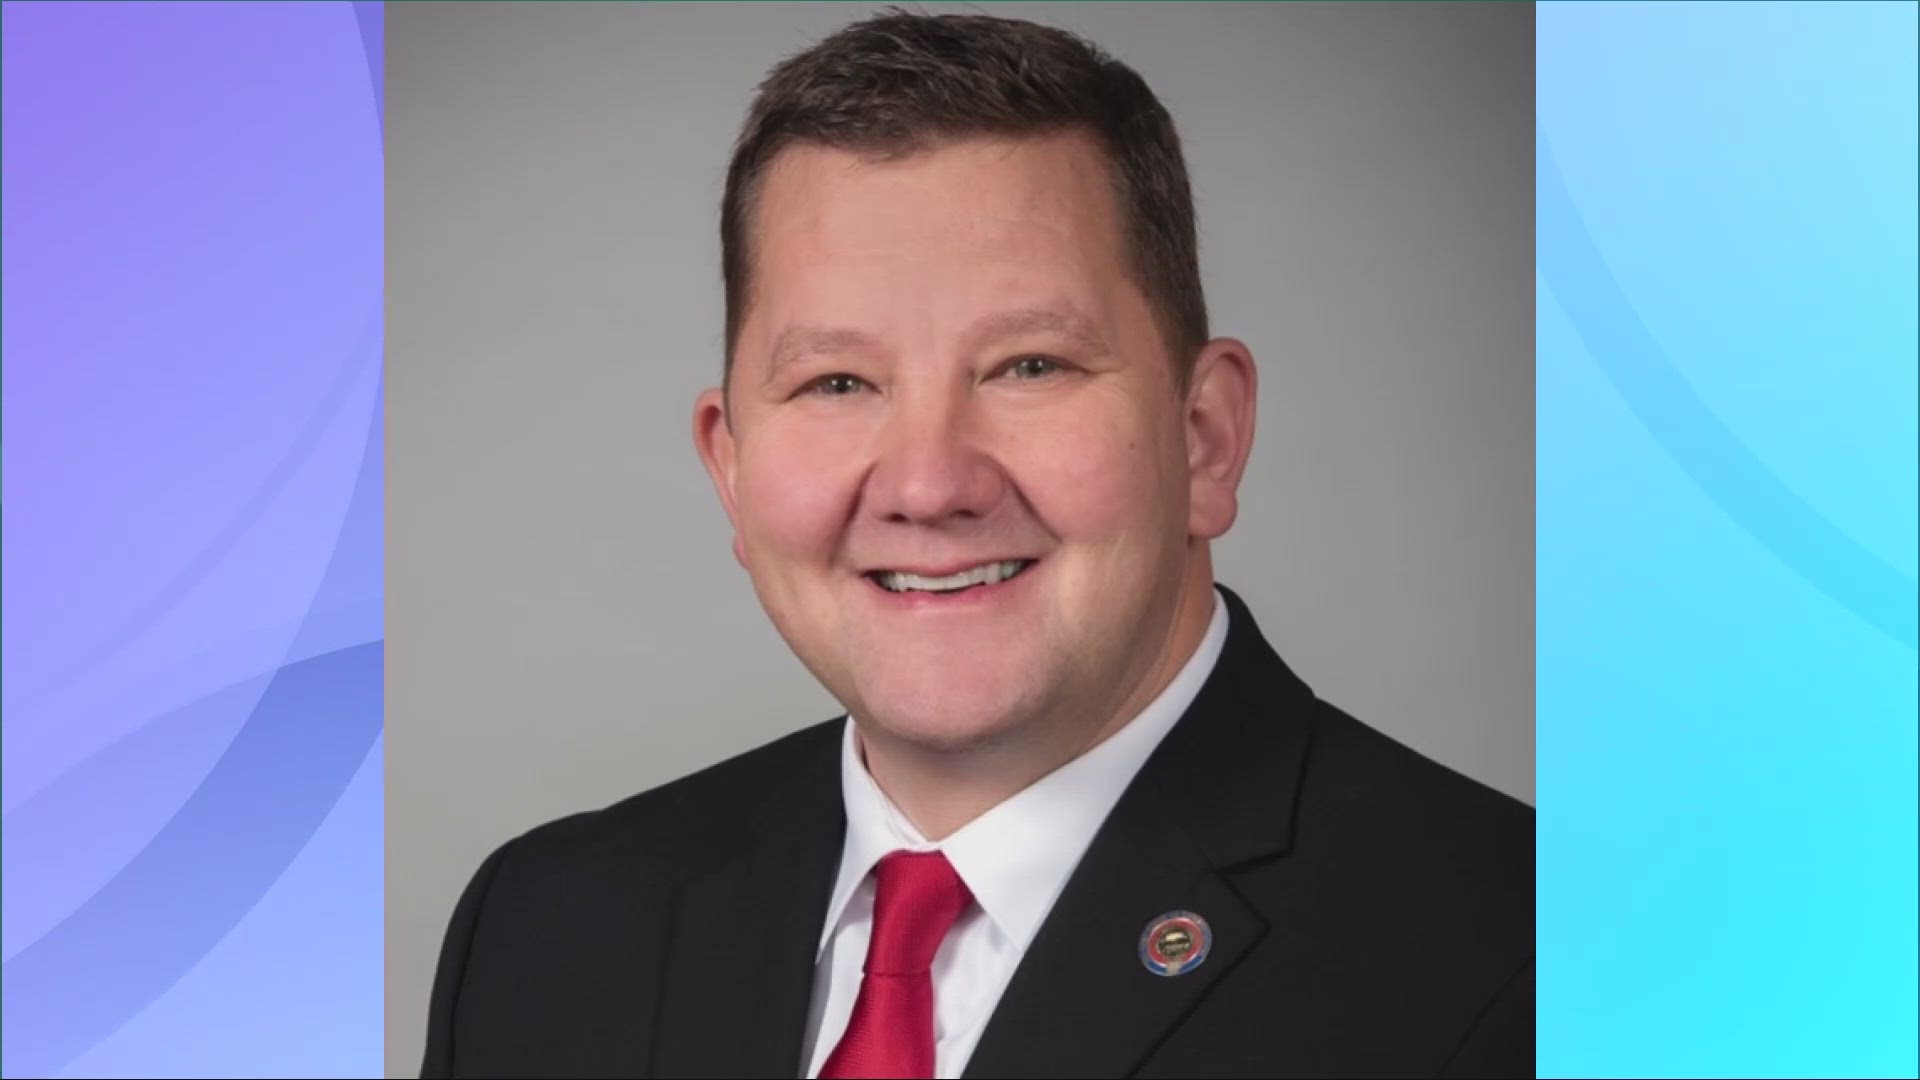 Ohio state Rep. Bob Young, who represents portions of Summit County, has been indicted on domestic violence and assault charges.